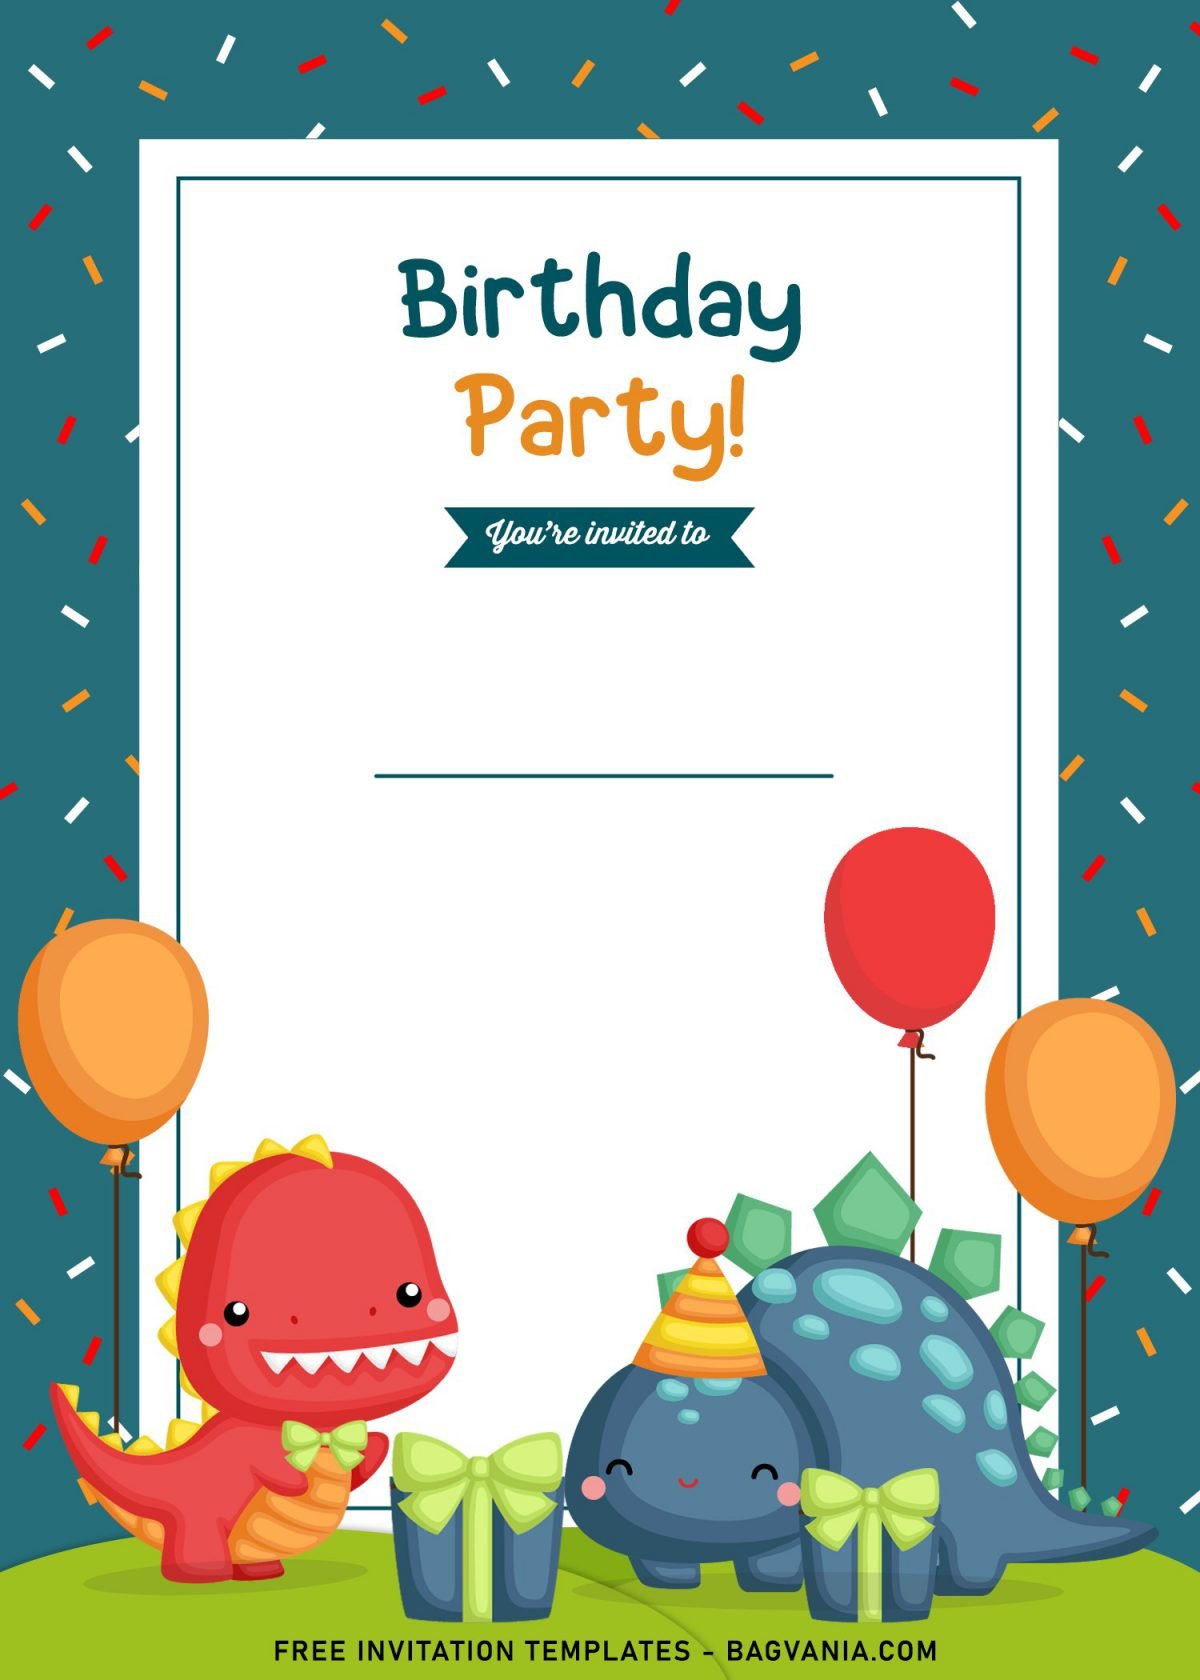 9+ Awesome Dino Party Birthday Invitation Templates and has portrait orientation design